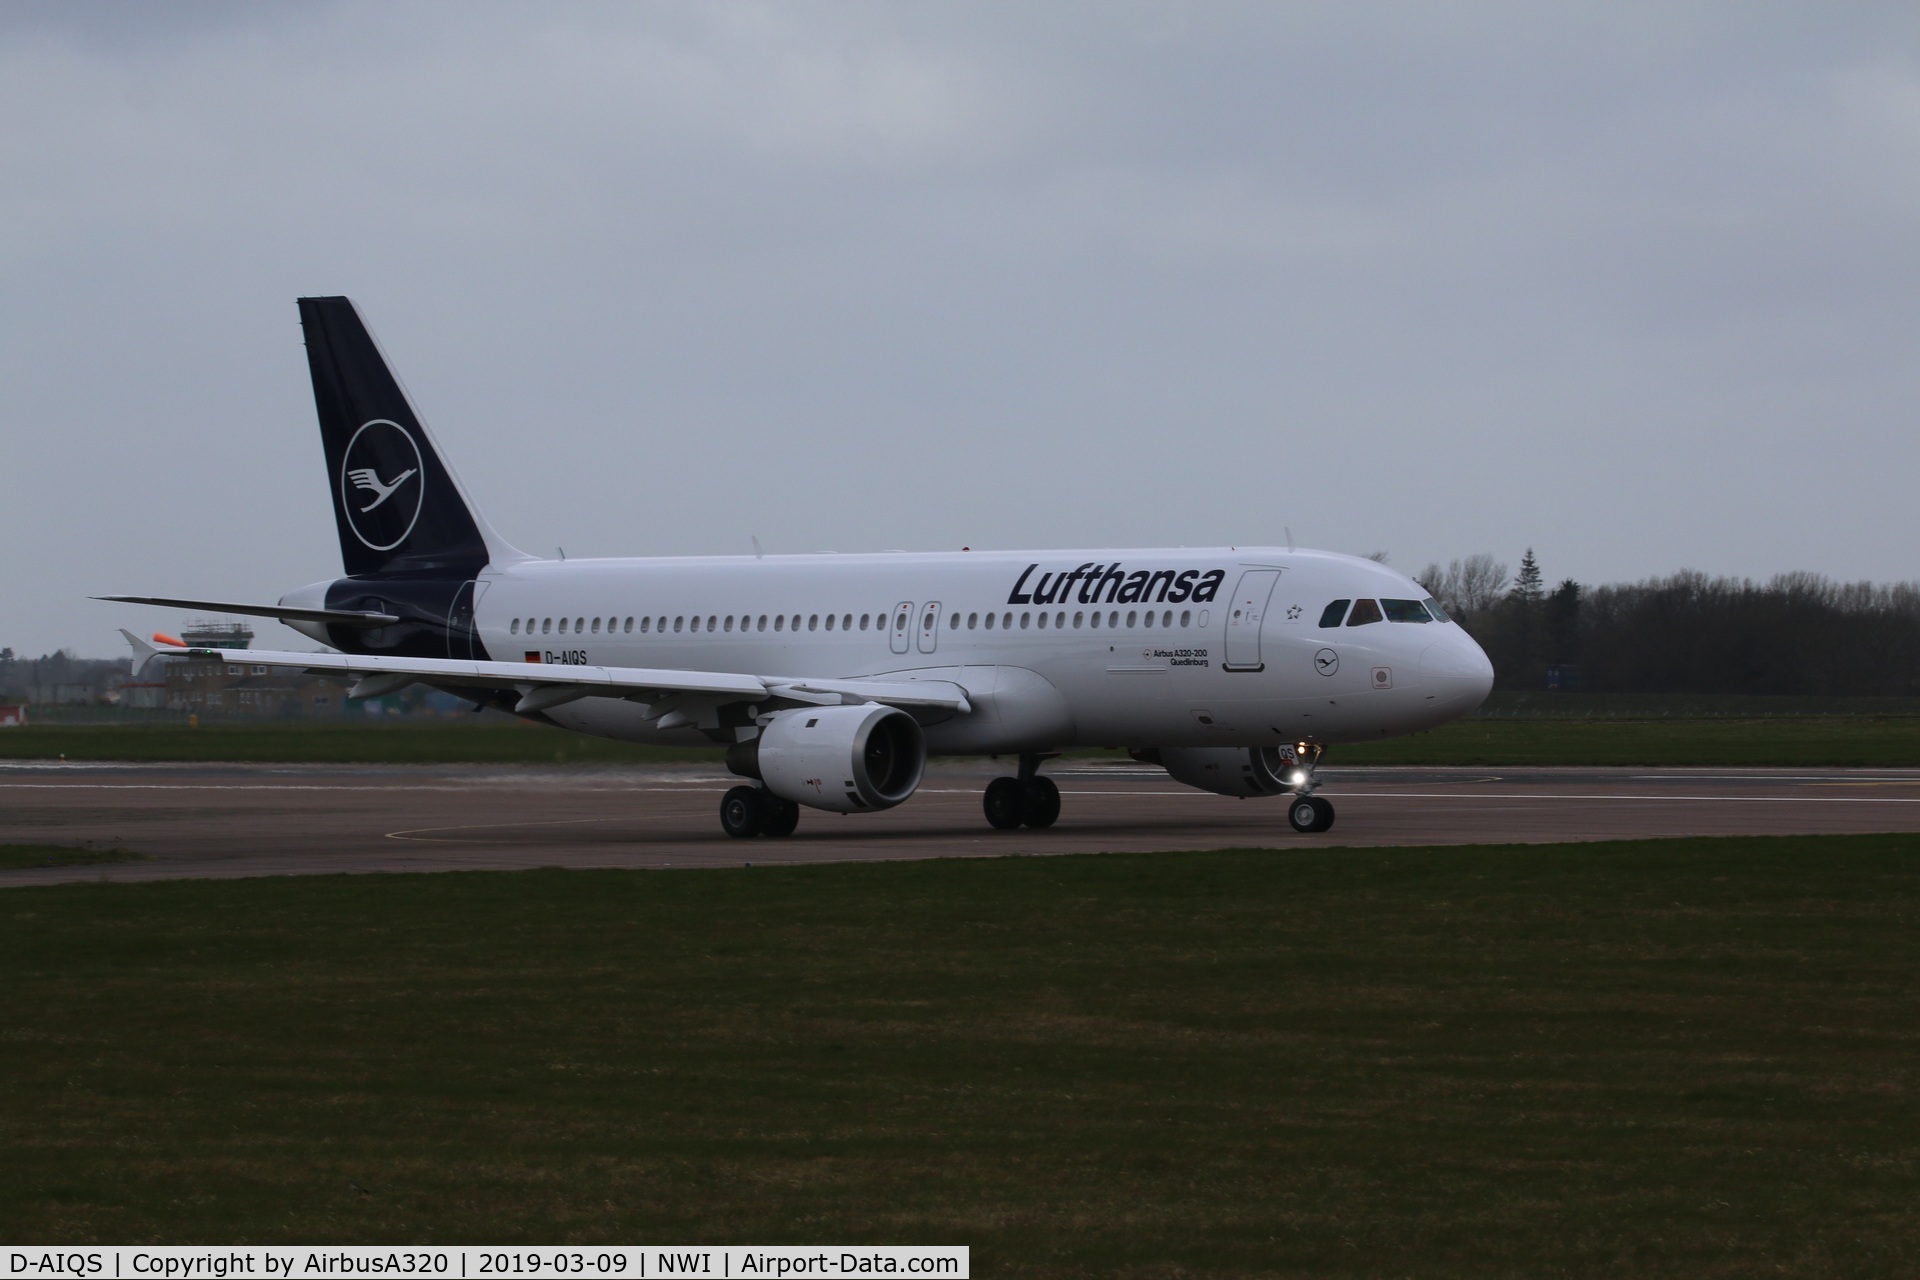 D-AIQS, 1993 Airbus A320-211 C/N 401, Departing Norwich after a repaint into the new Lufthansa livery